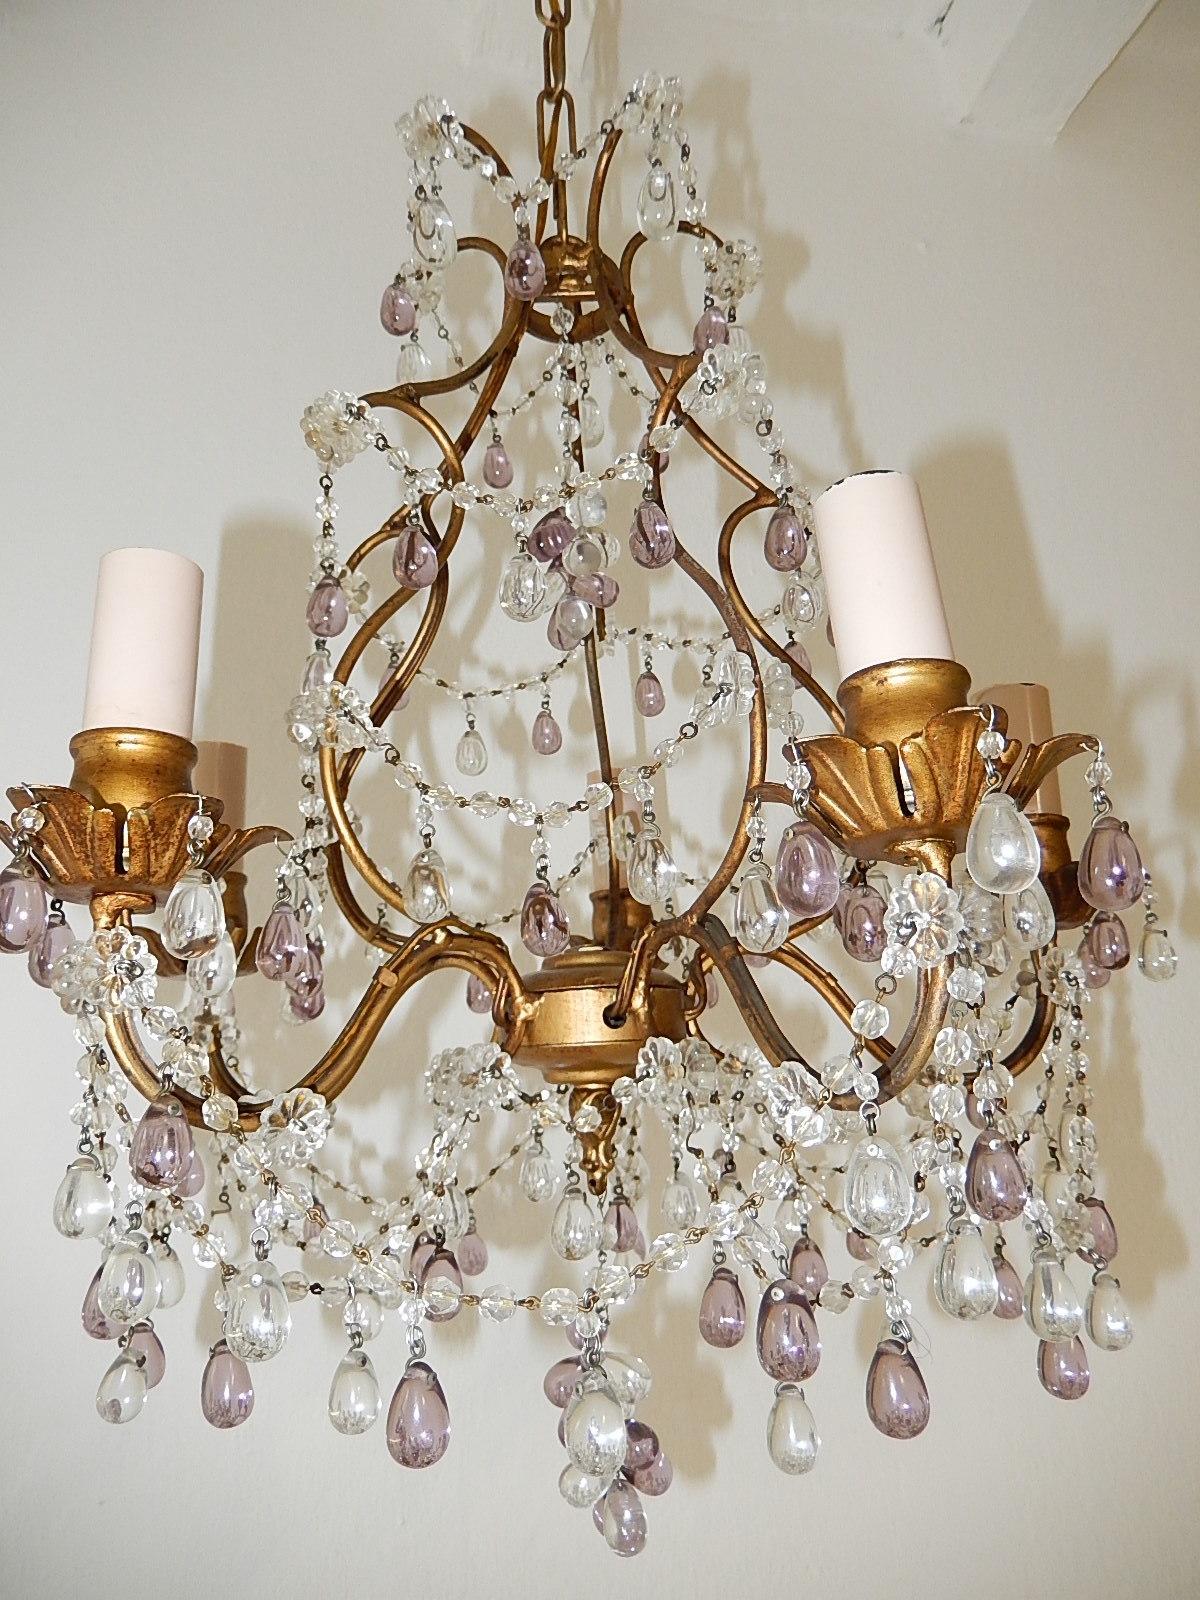 French Beaded Maison Baguès  Amethyst & Clear Murano Drops Chandelier, 1920s For Sale 3